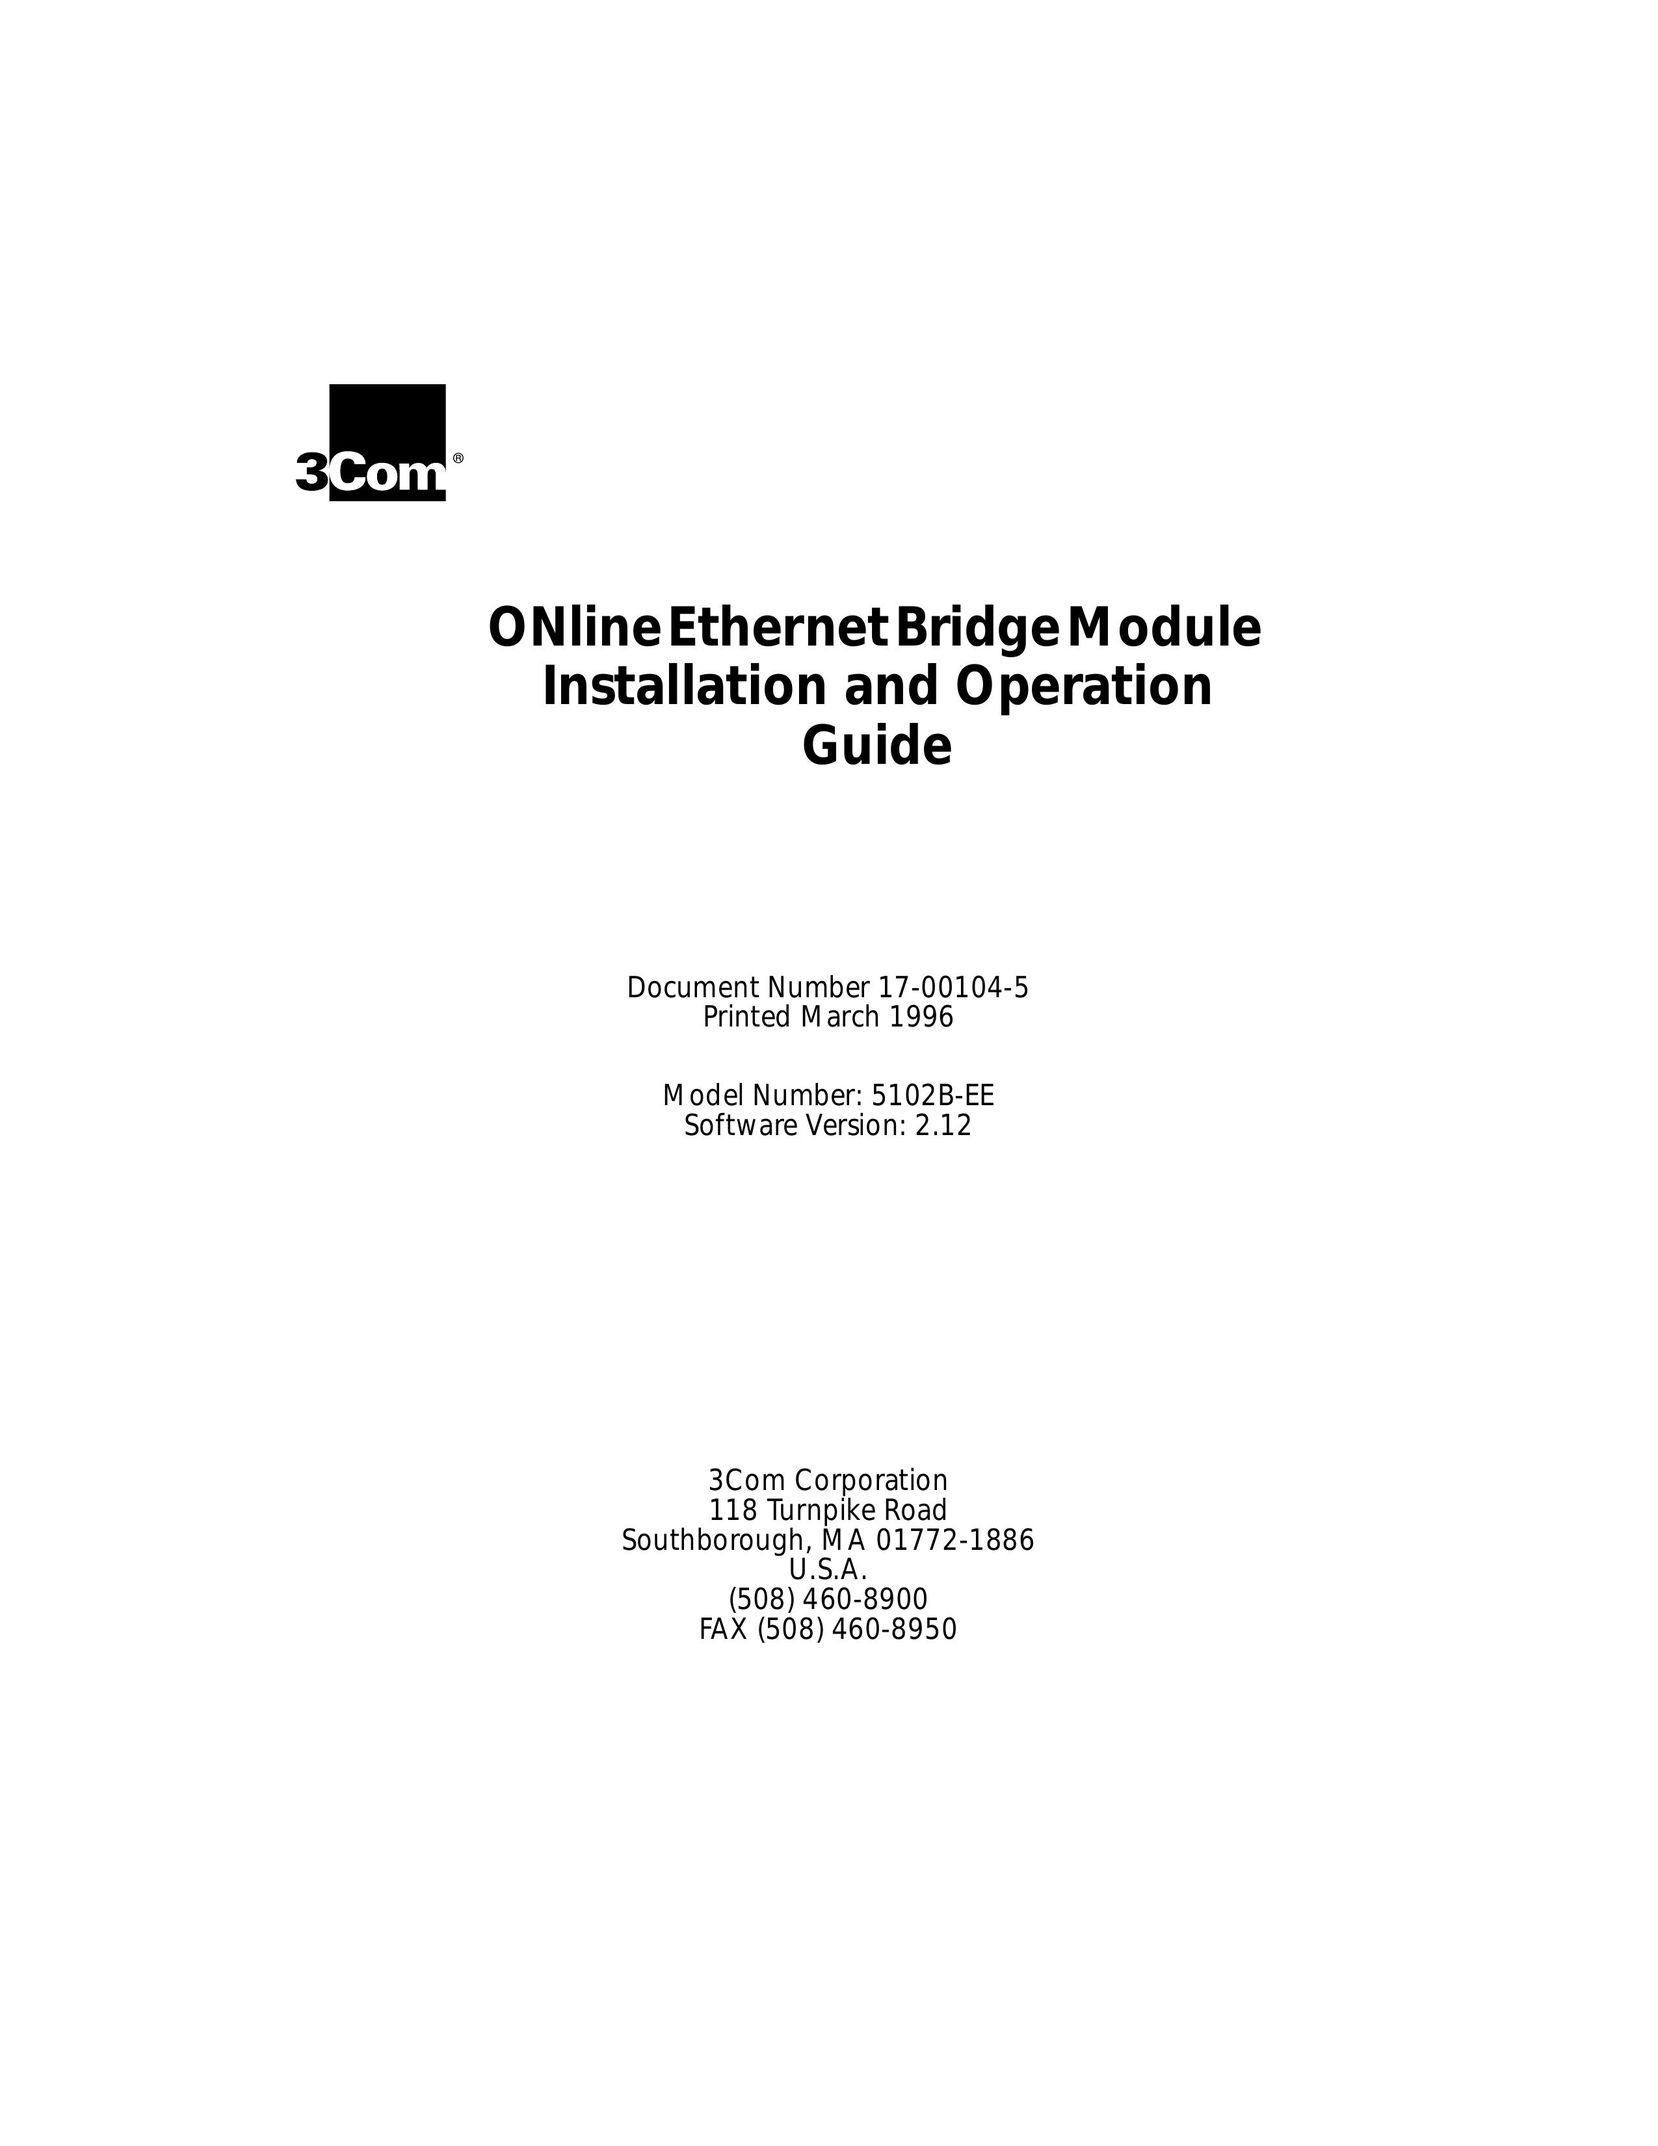 3Com 5102B-EE Network Router User Manual